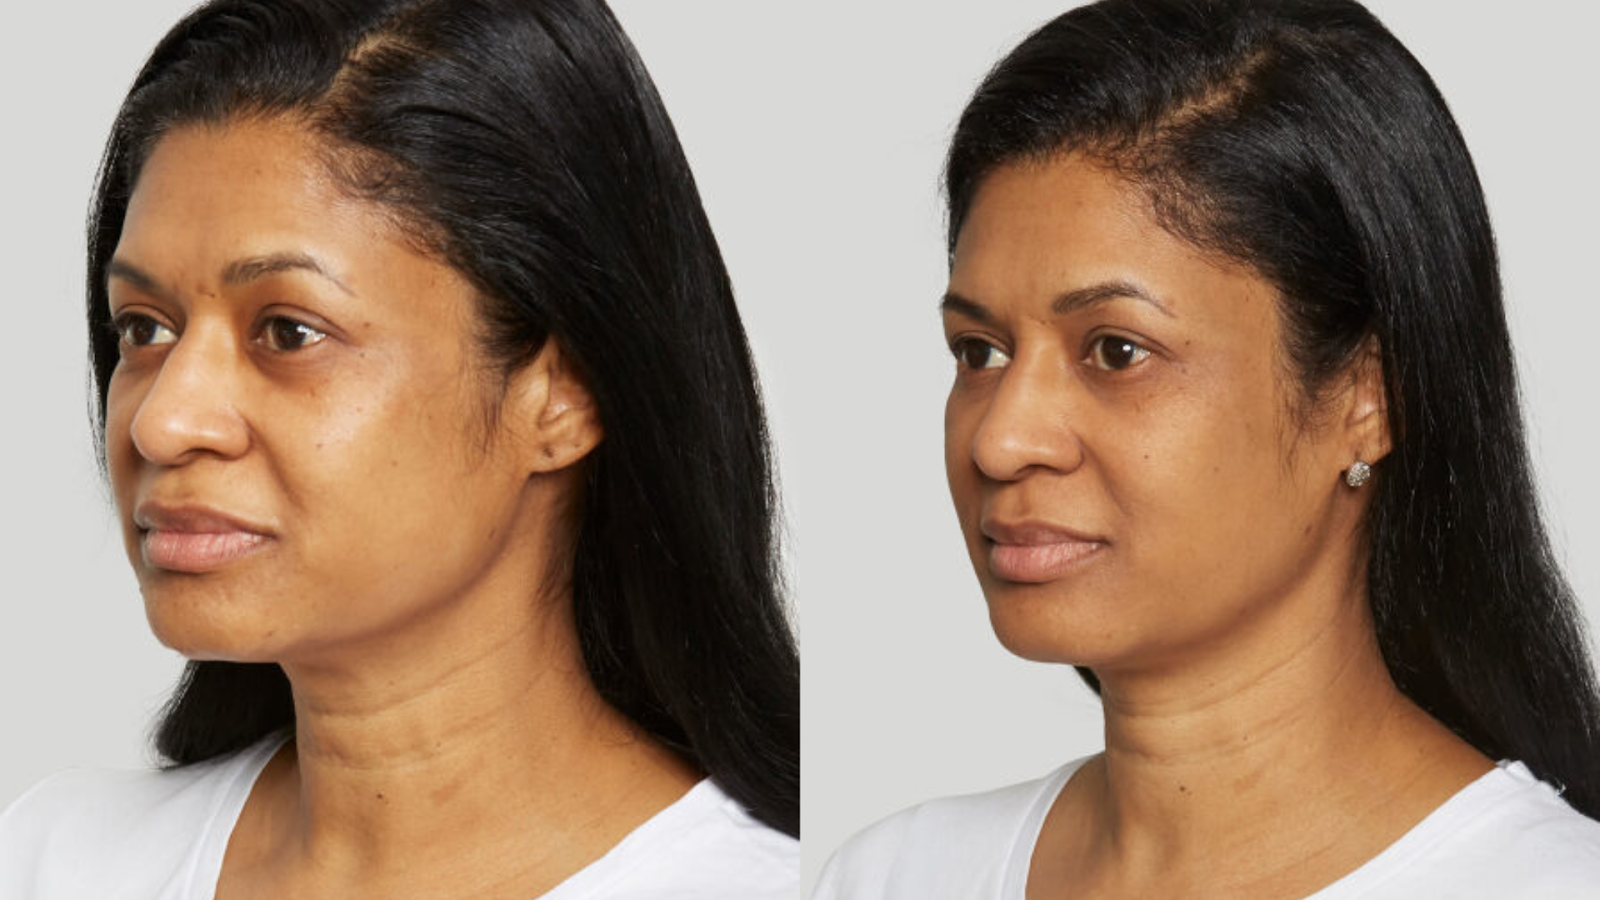 Before and after facial treatment.